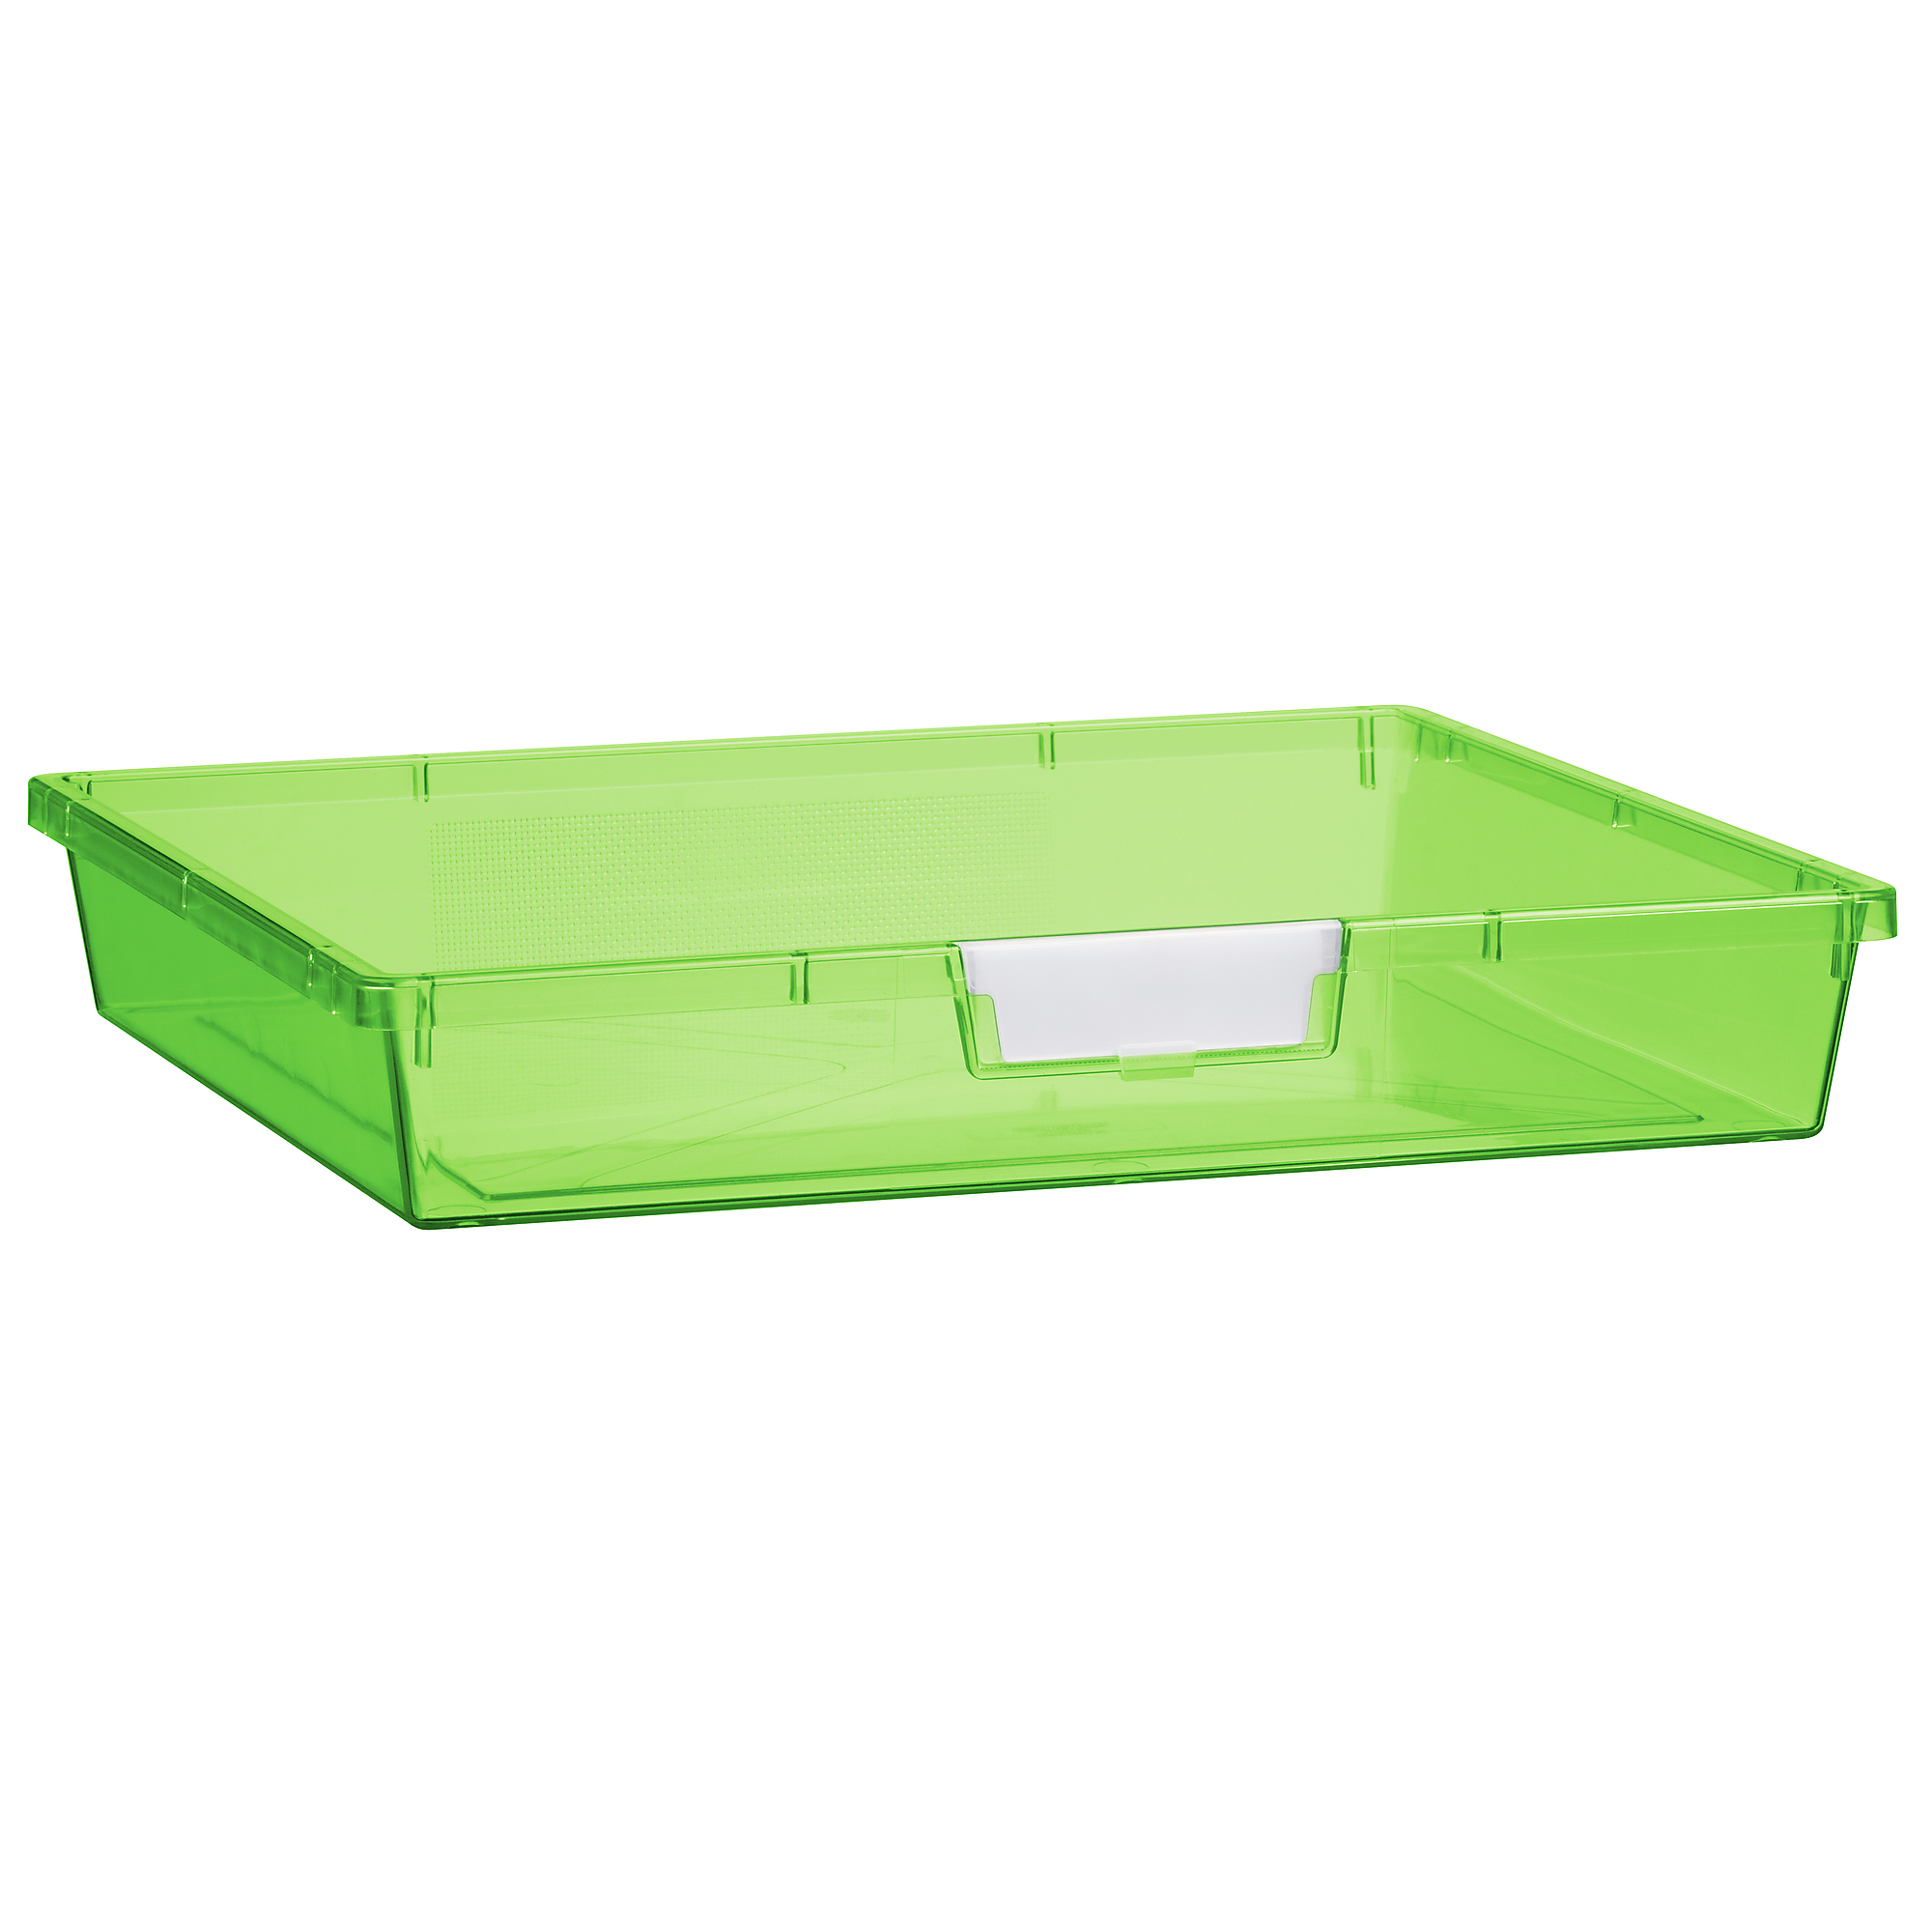 Certwood StorWerks, Wide Line Tray 3Inch in Neon Green - 3 Pack, Included (qty.) 3, Material Plastic, Height 12 in, Model CE1956FG1